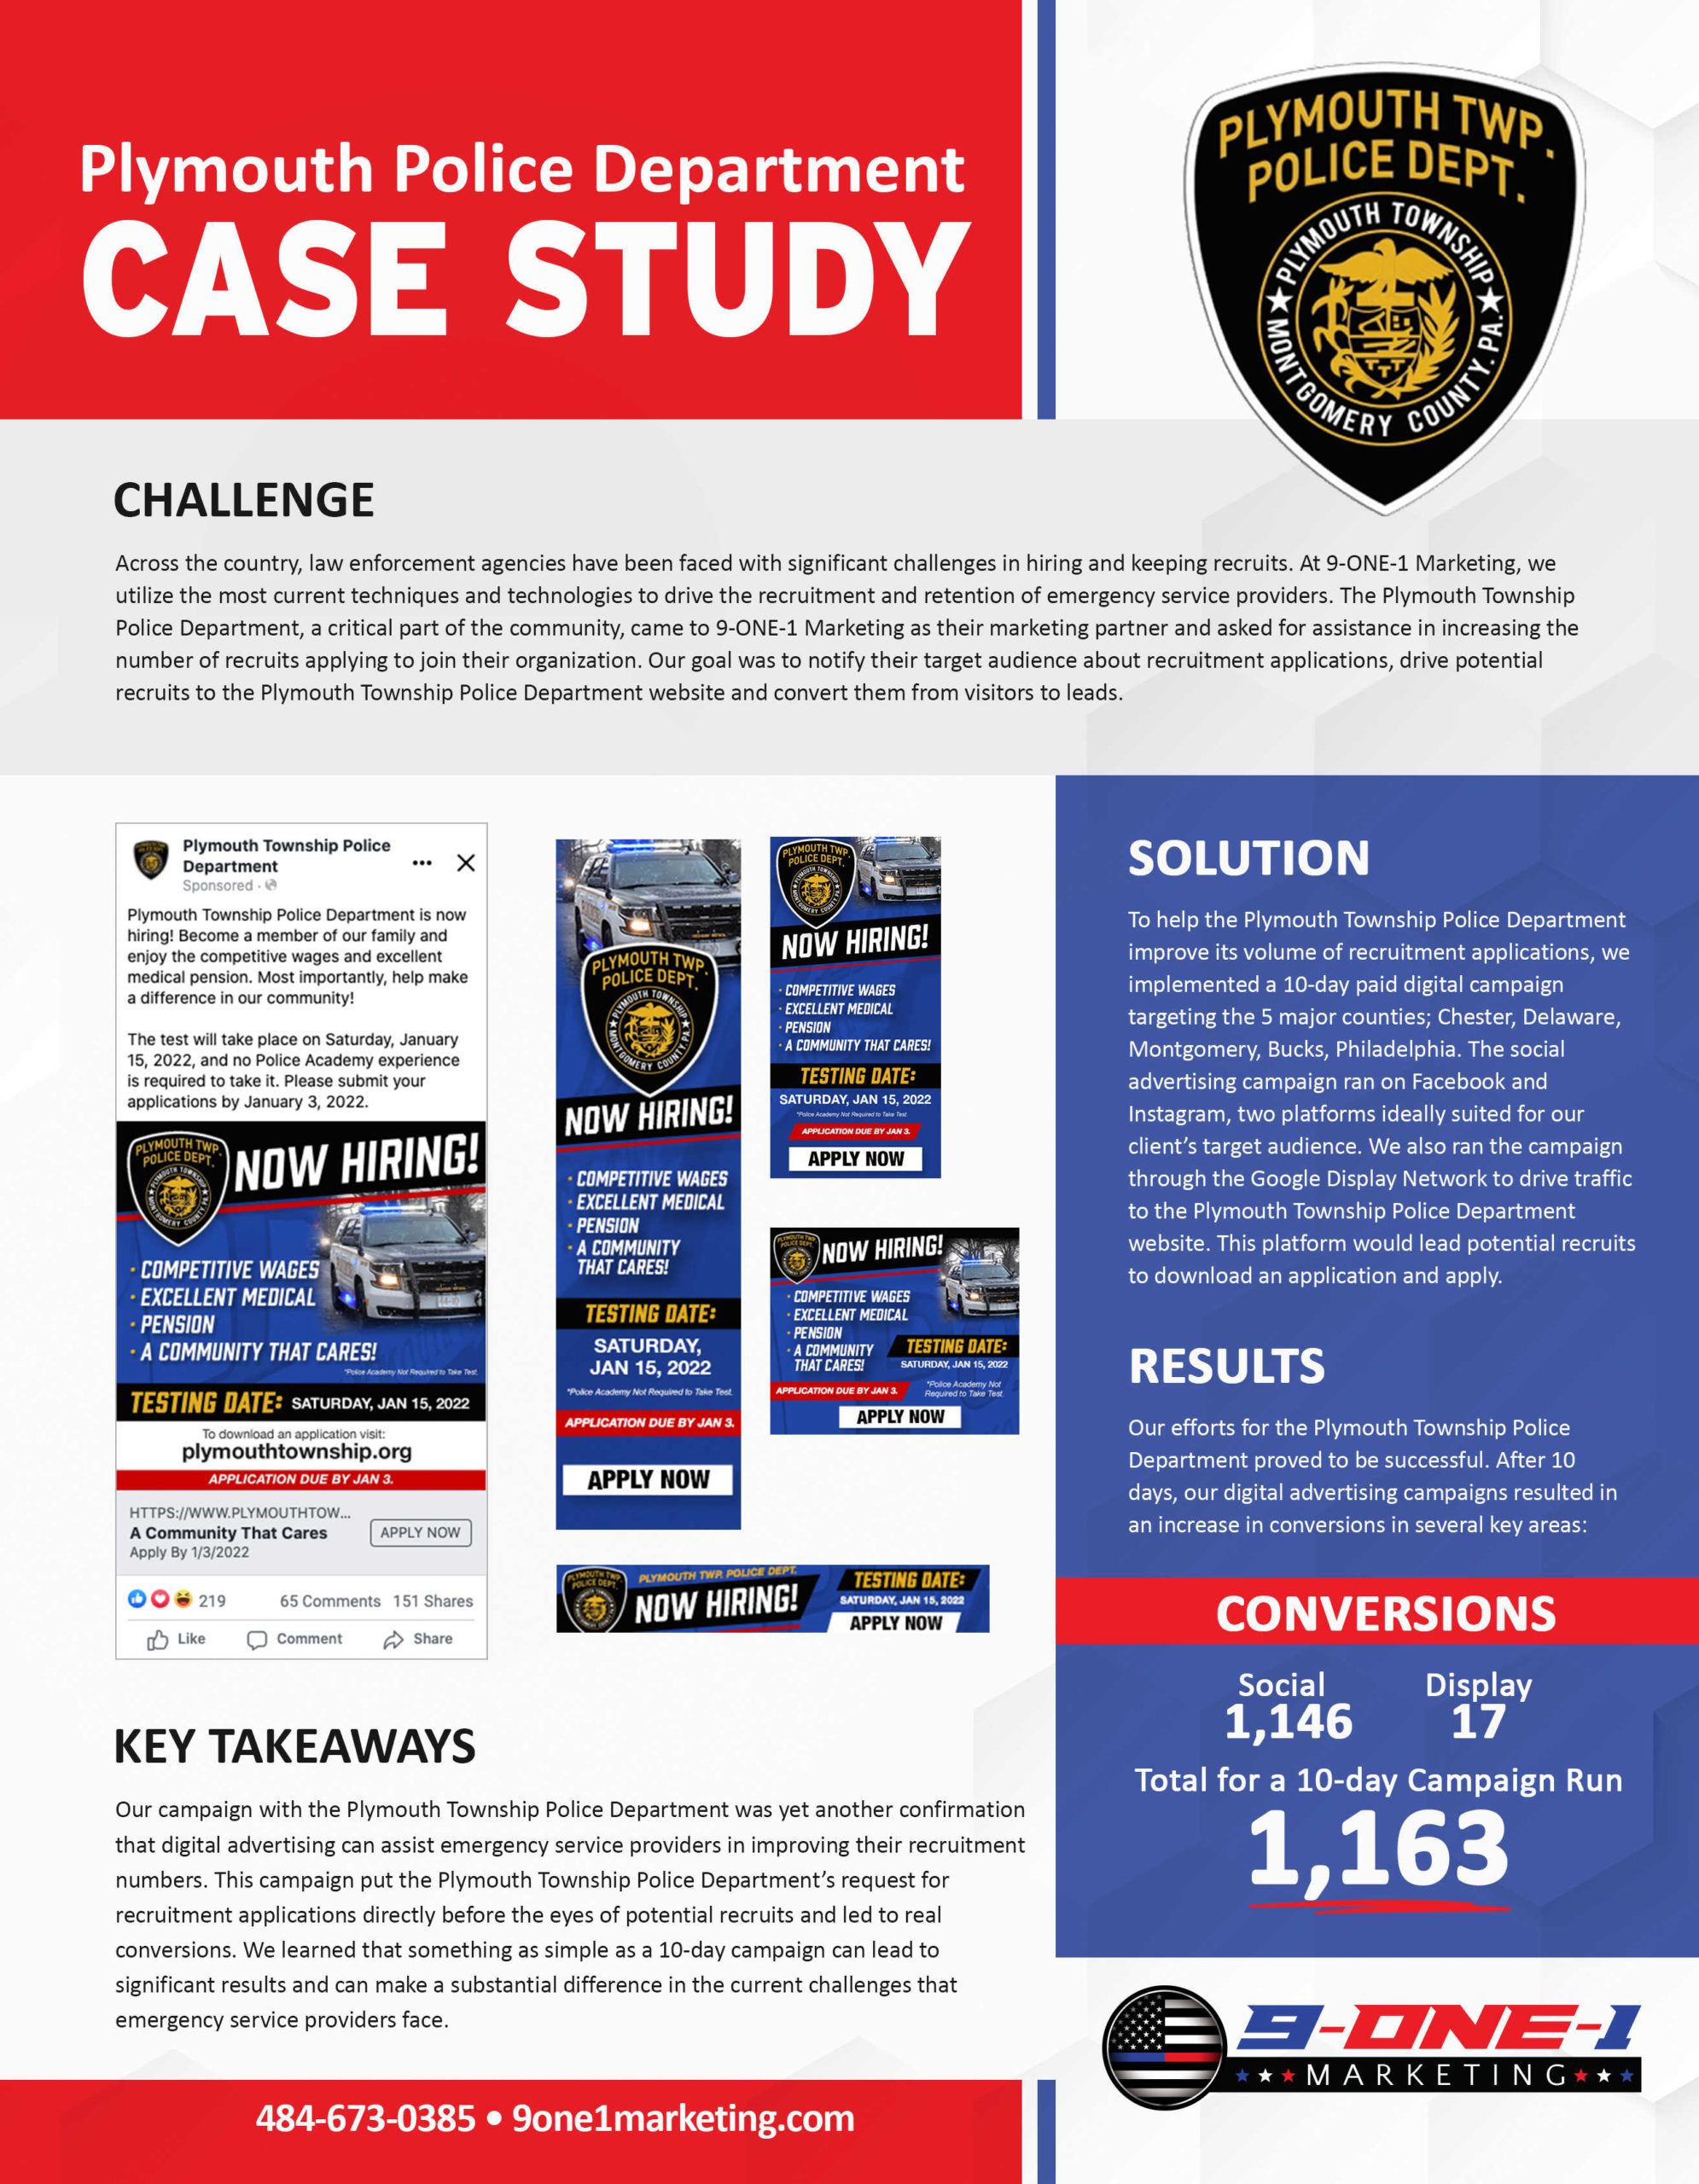 Plymouth Police Department Case Study